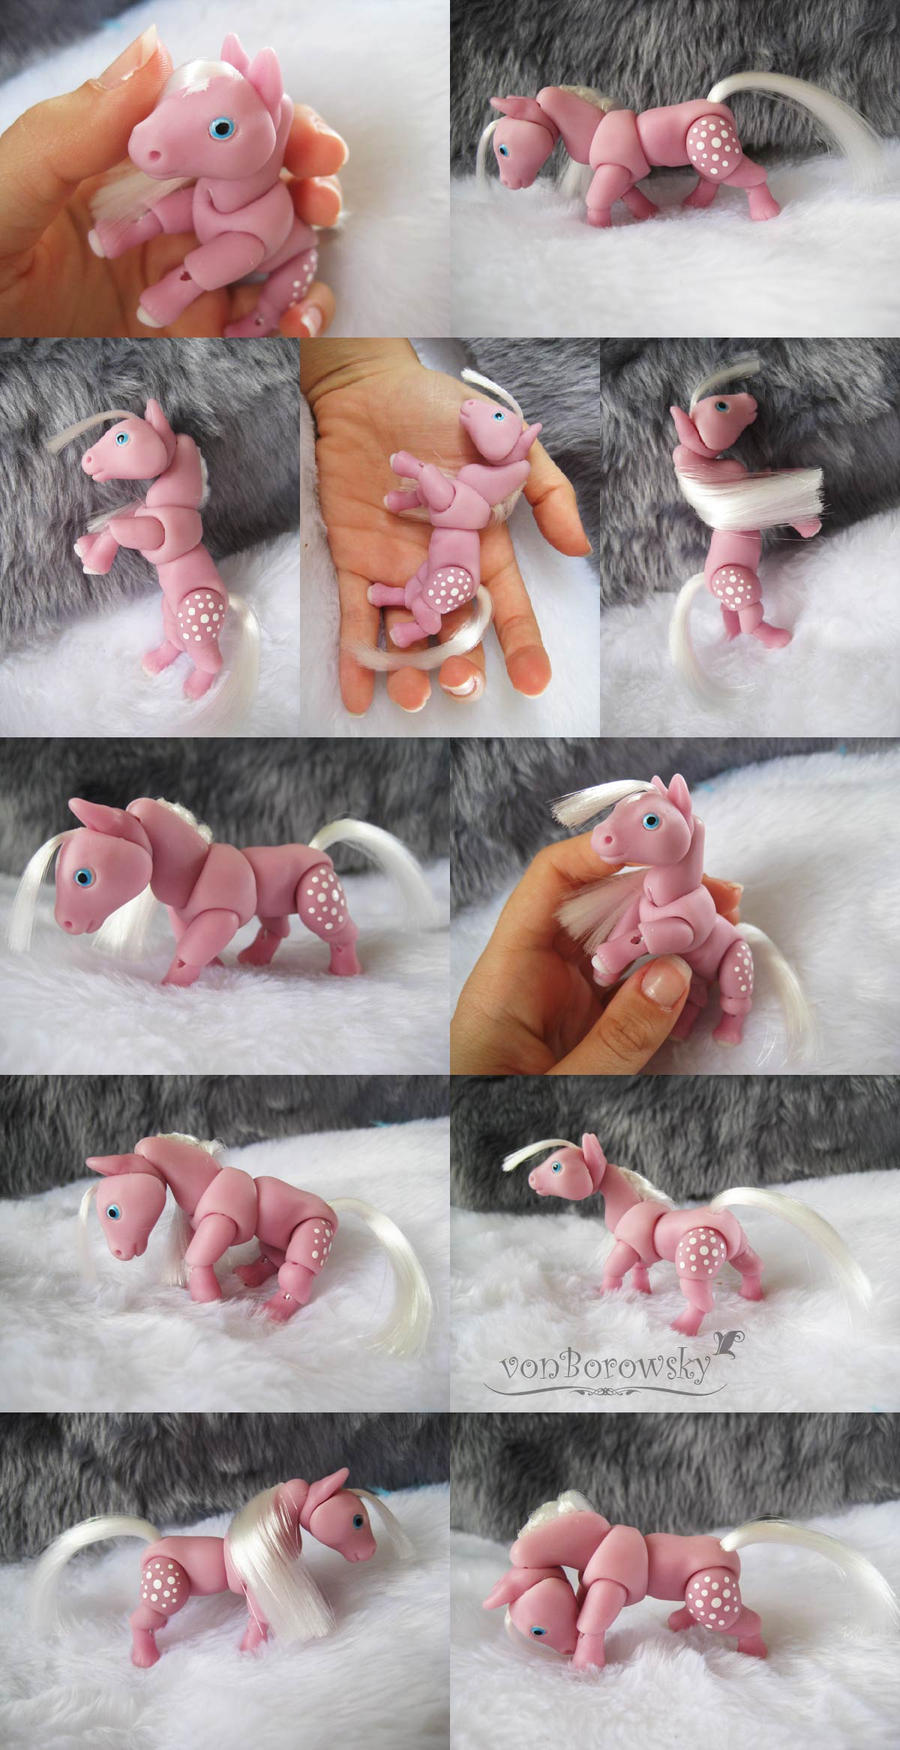 Ball Jointed Pony